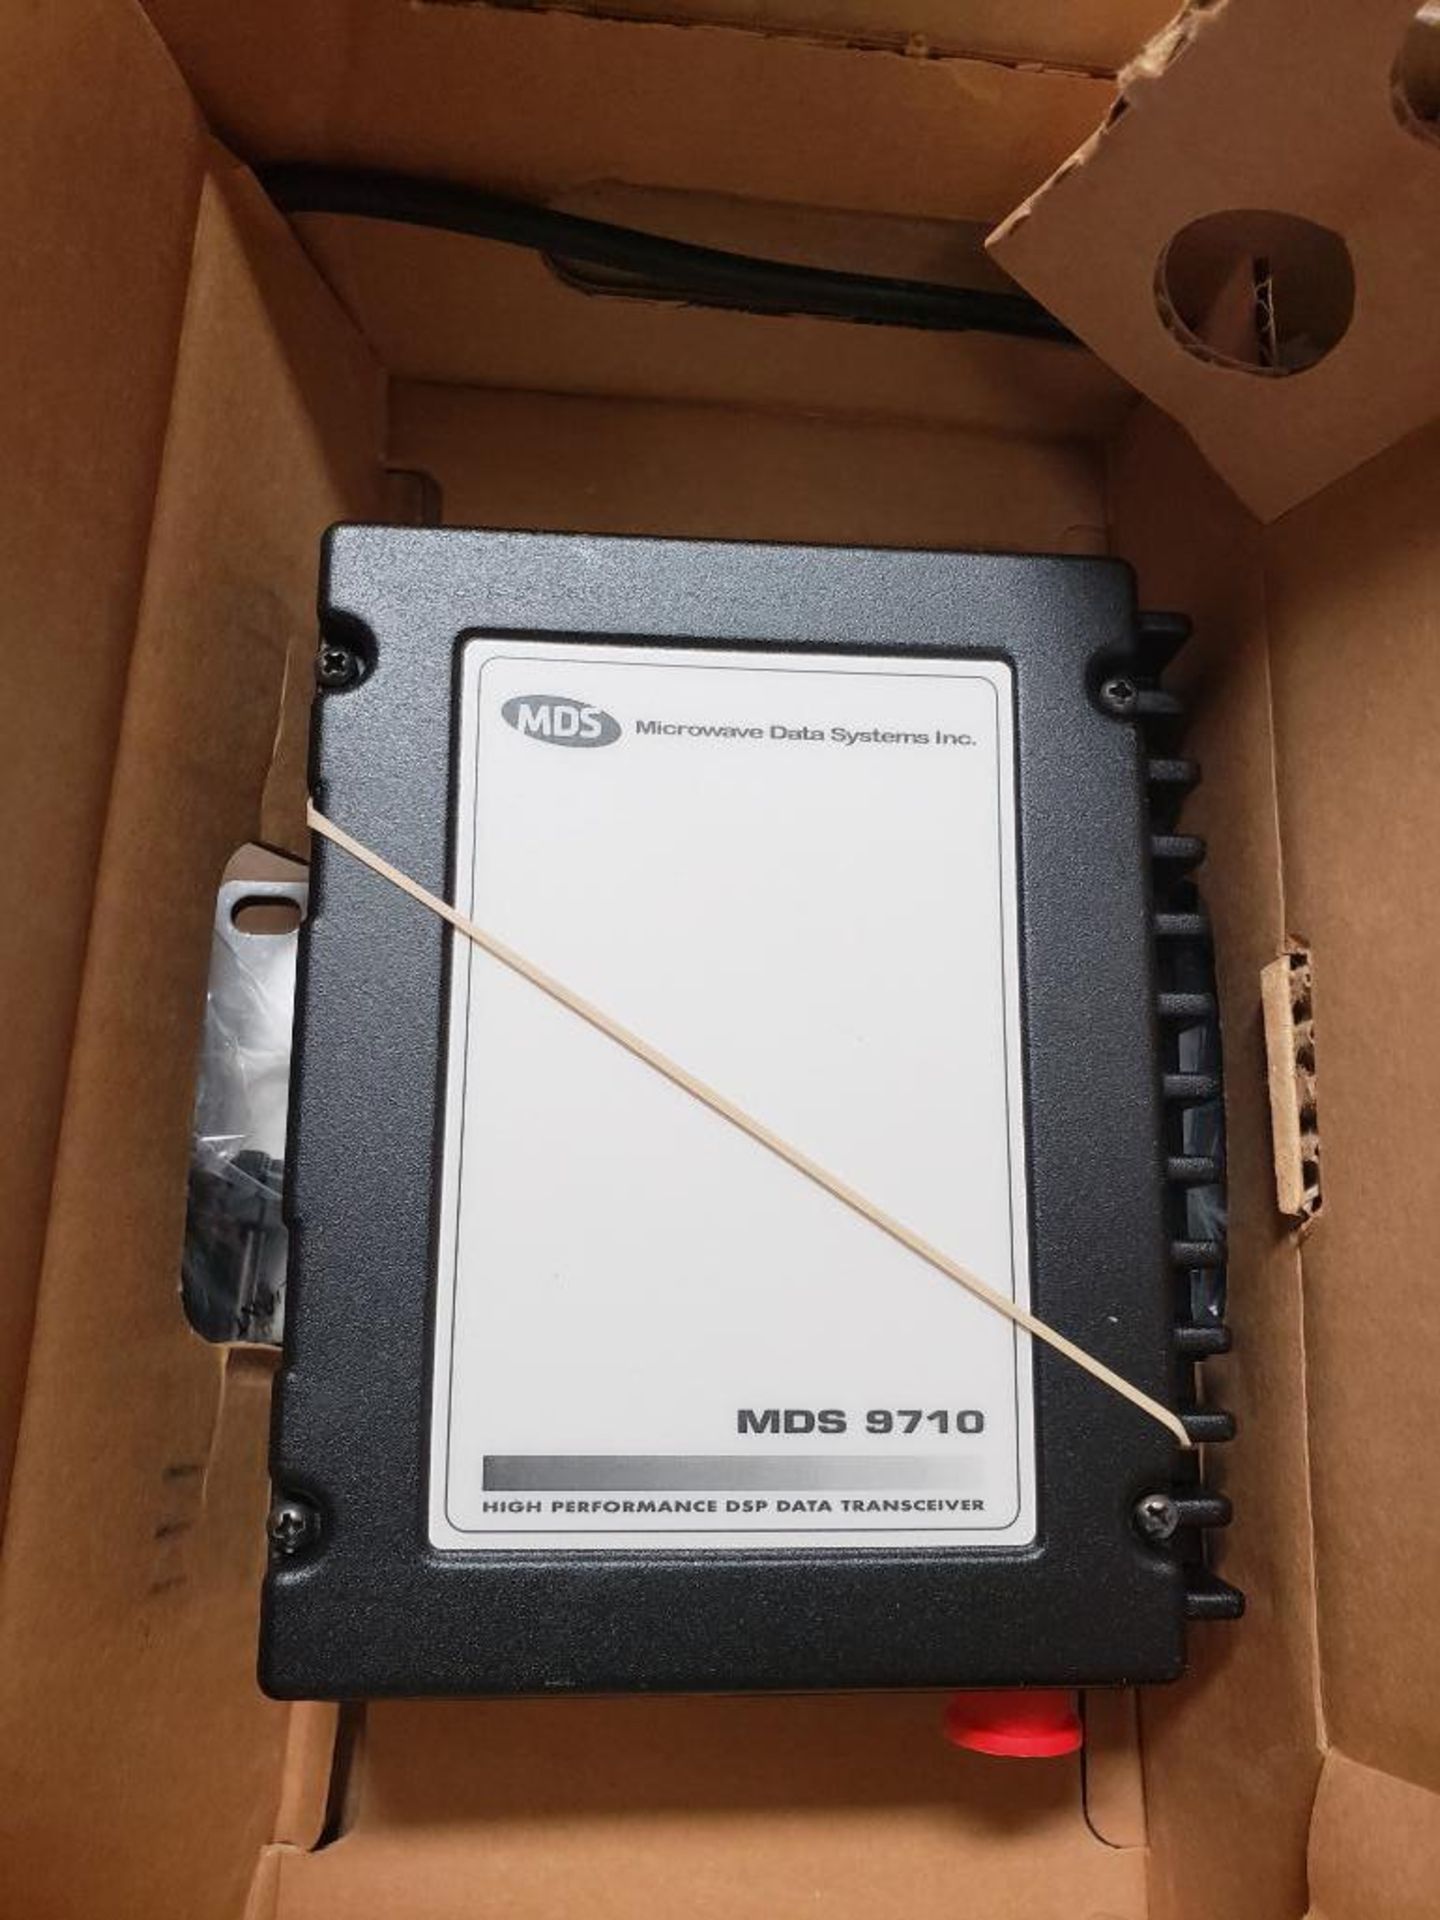 Qty 2 - Insite 6 model 9600BPS ASYNC. New in boxes as pictured. - Image 5 of 5